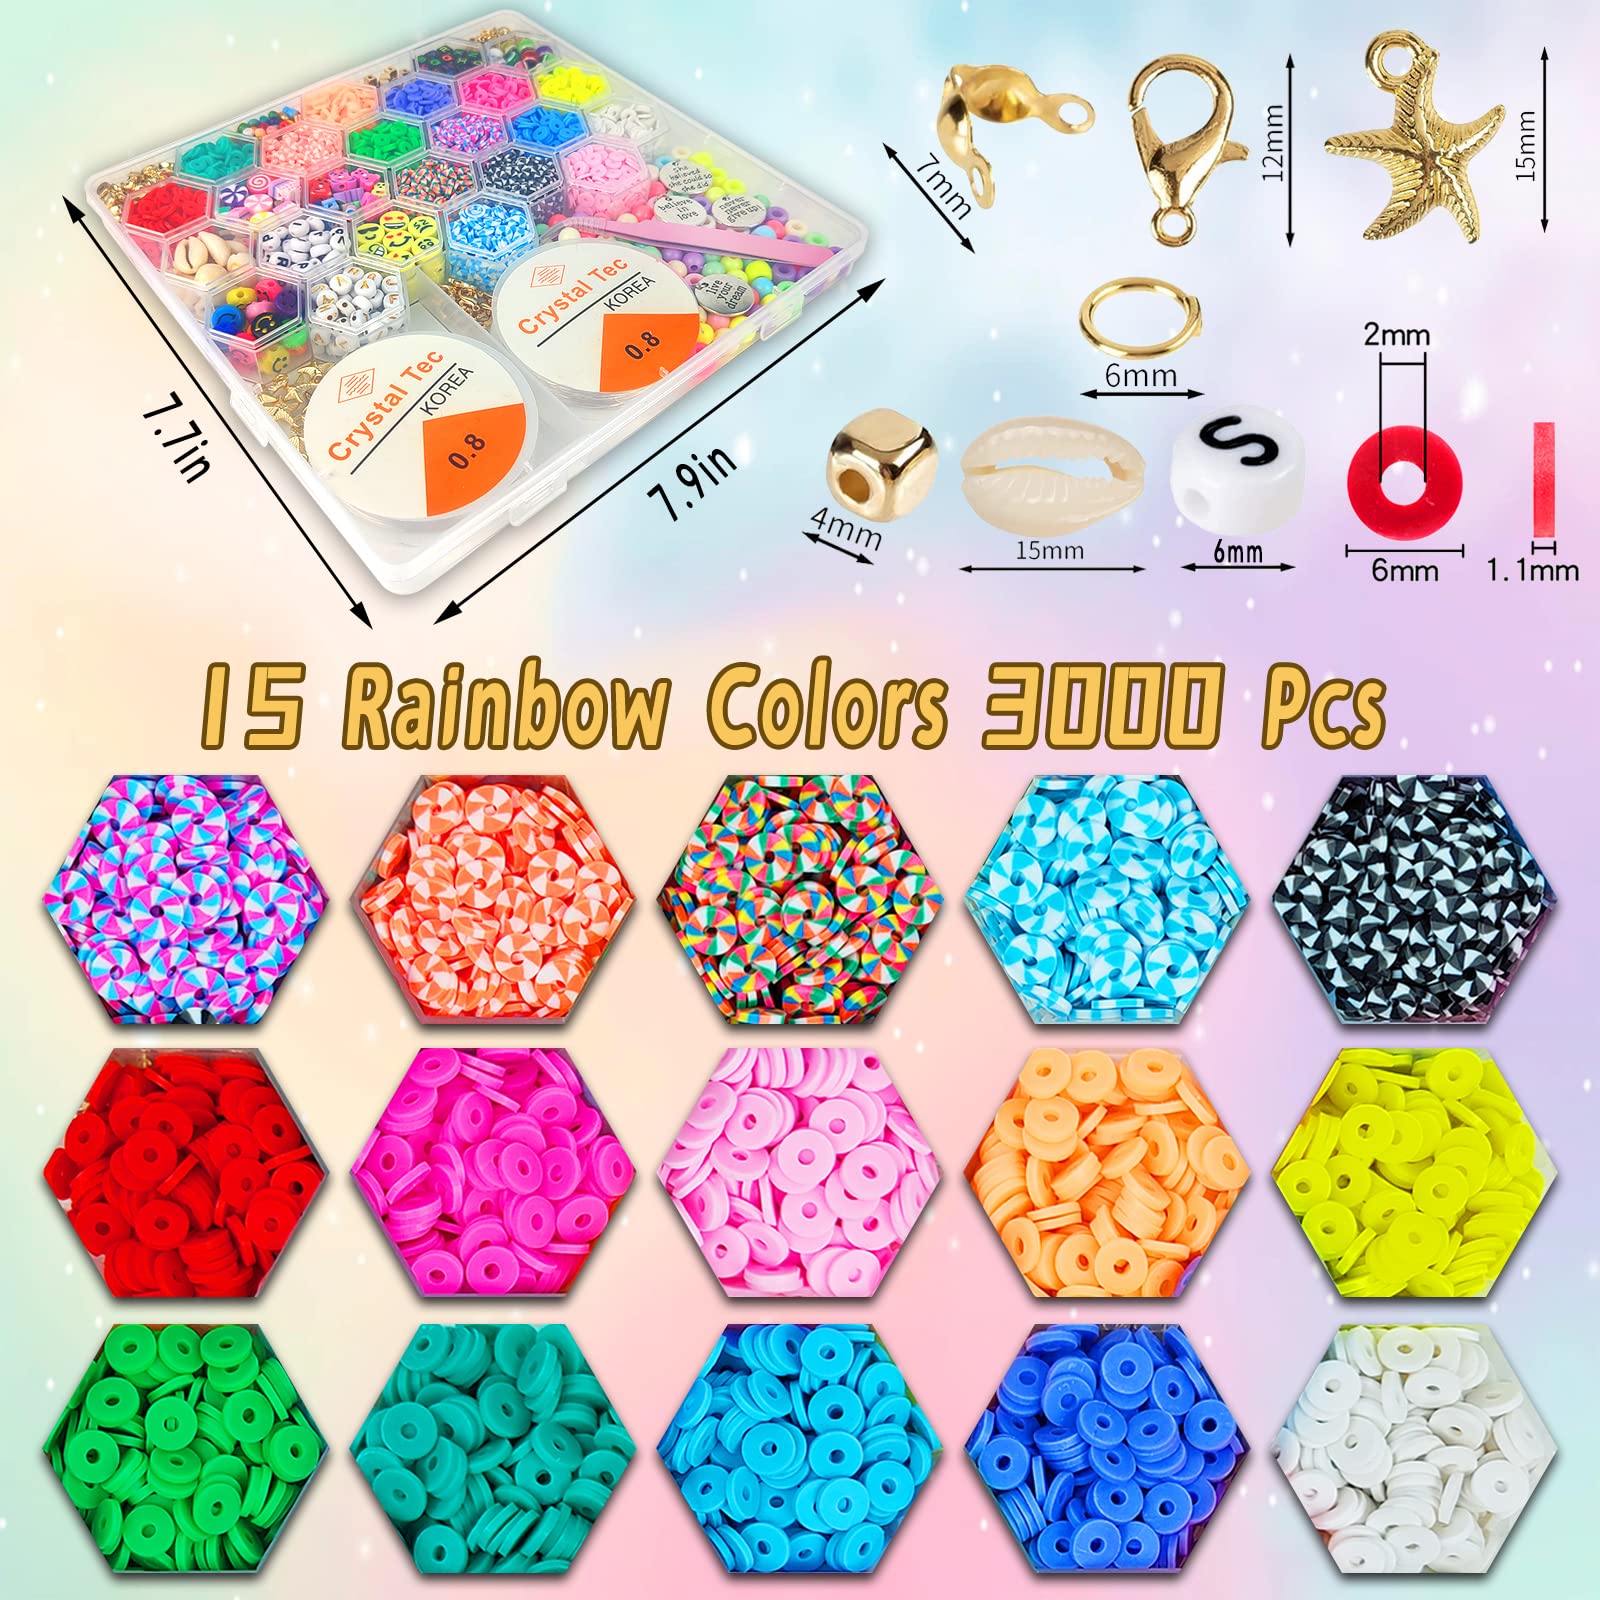 Luwanio Bracelet Making Kit, Pony Beads Clay Beads Smiley Beads Letter  Beads for Friendship Bracelets Jewelry Making, Kandi Bracelet Kit, DIY Arts  and